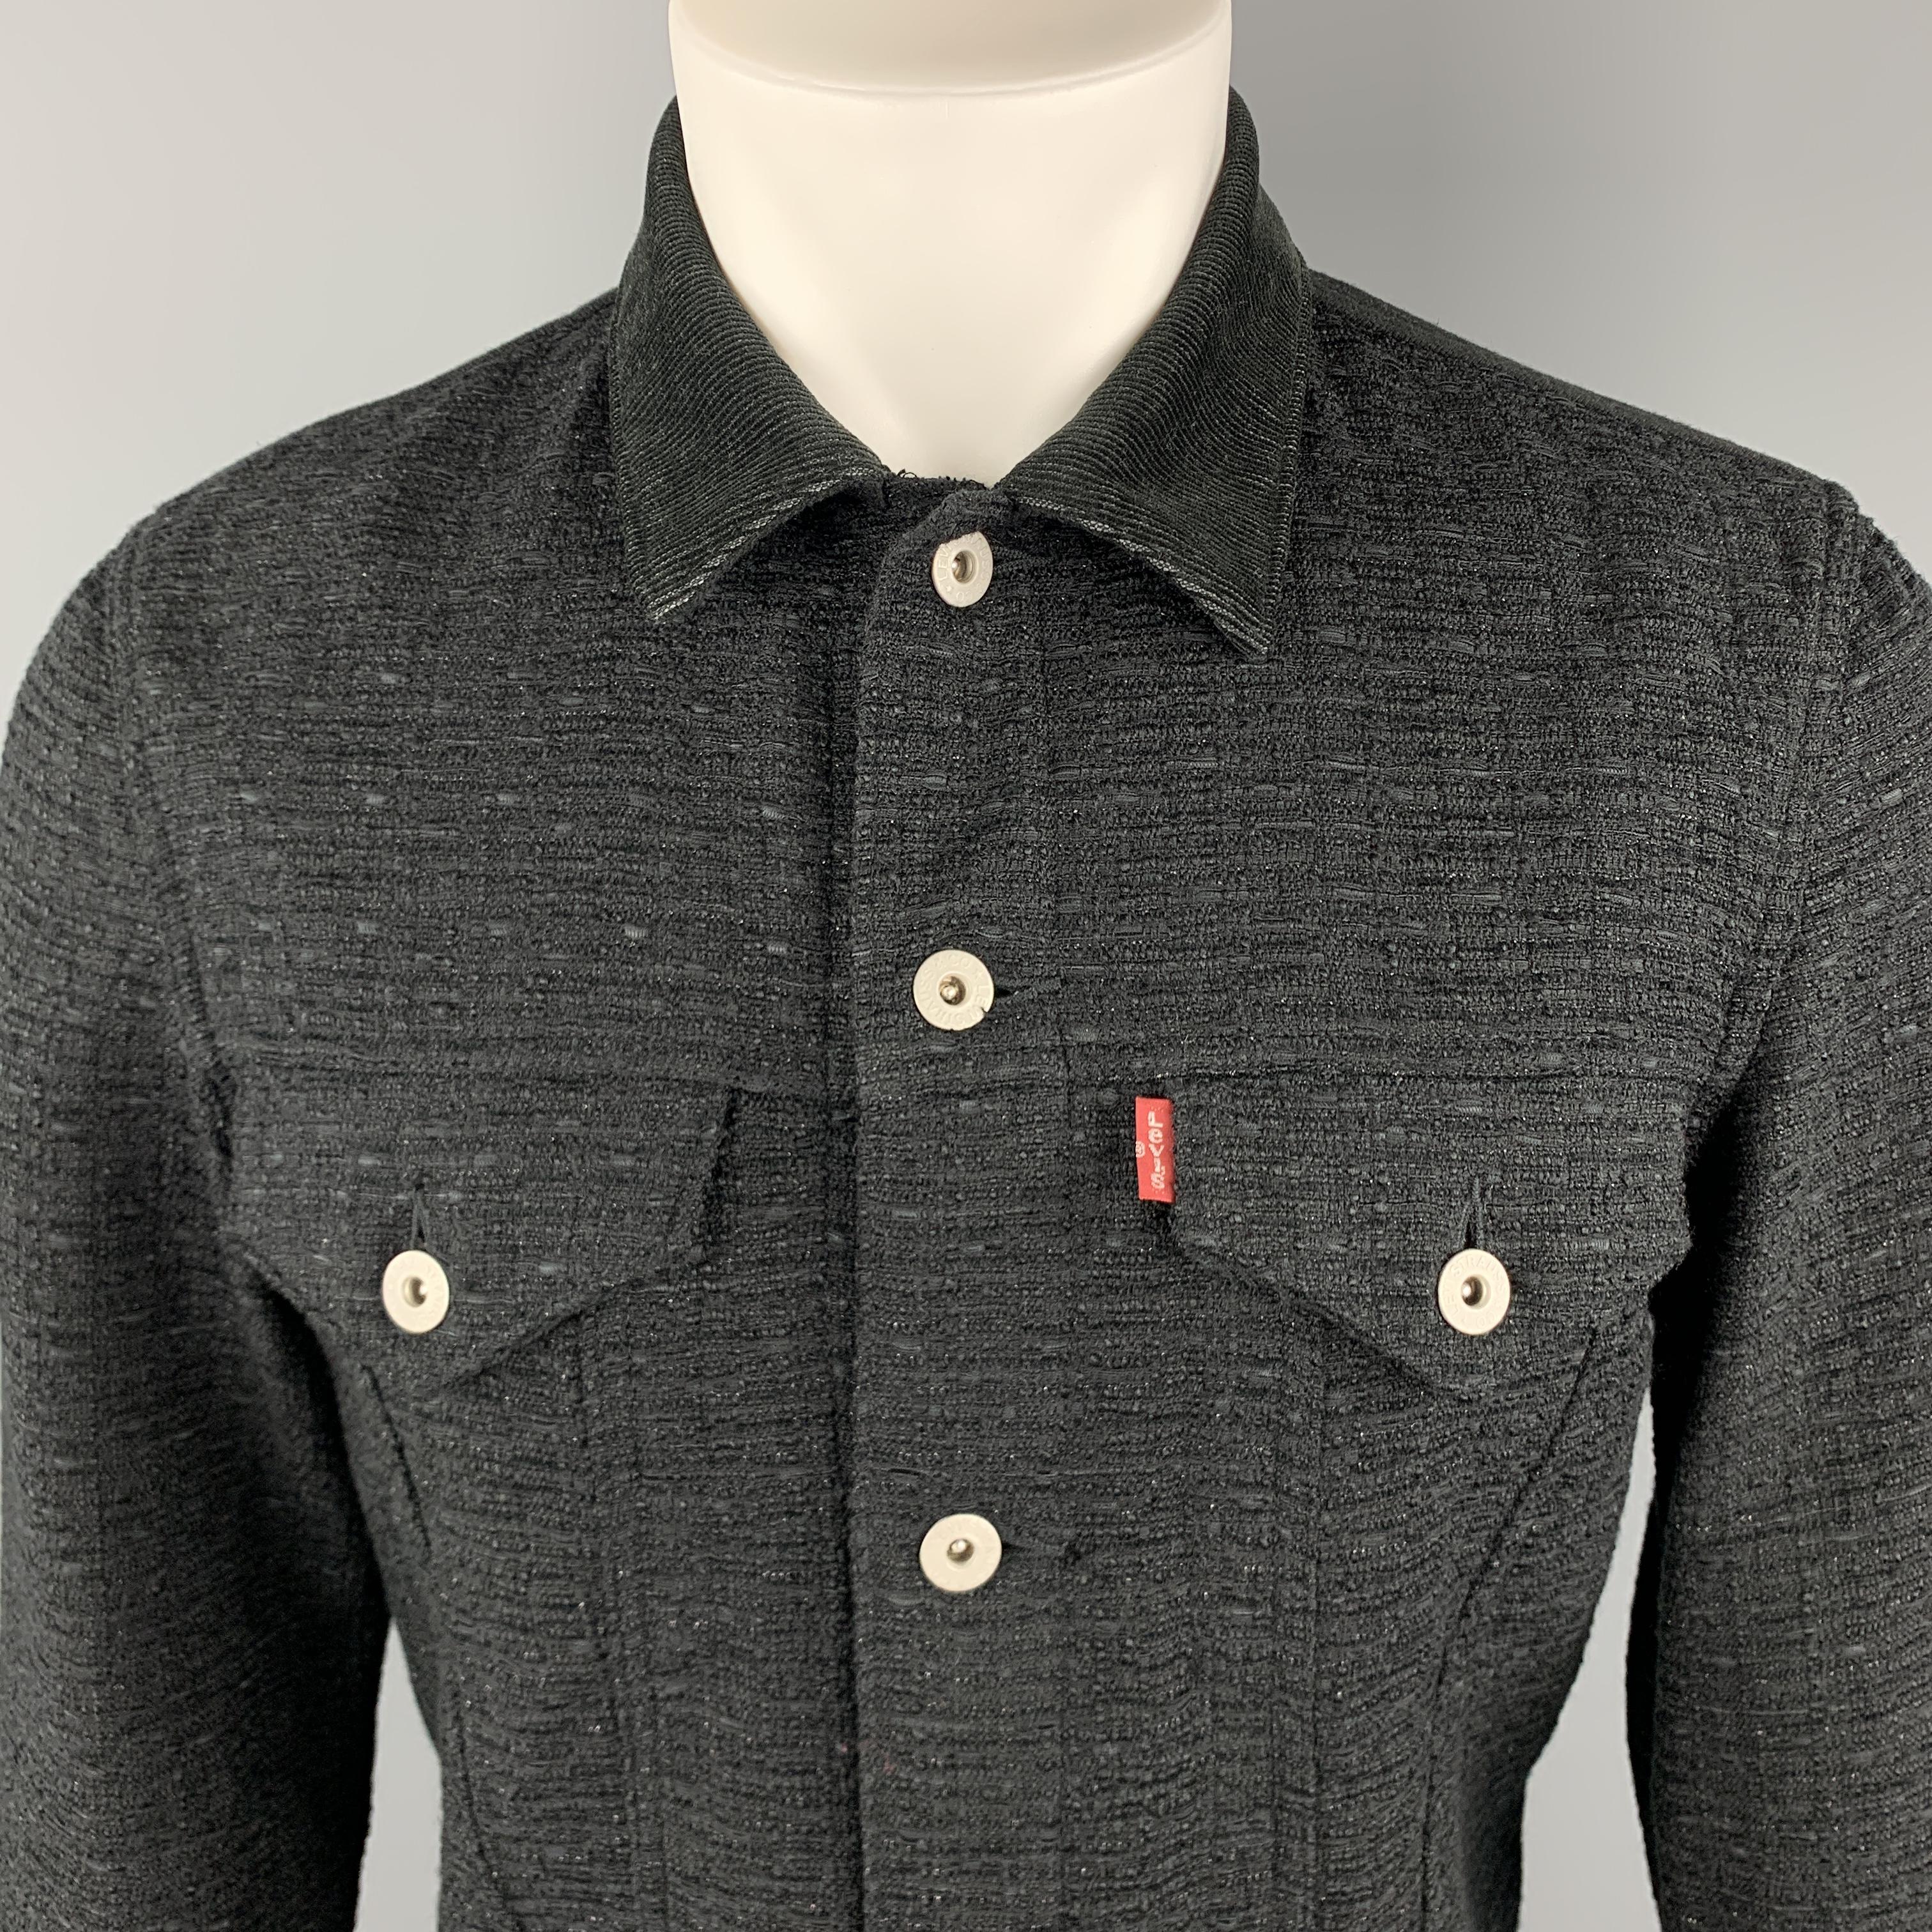 JUNYA WATANABE COMME des GARCONS MEN LEVI'S Trucker jacket comes in a black tone in a wool blend material, mixed fabrics, with a corduroy collar and cuffs, patch pockets, six buttons at closure, single breasted, elbow patches, and buttoned cuffs.